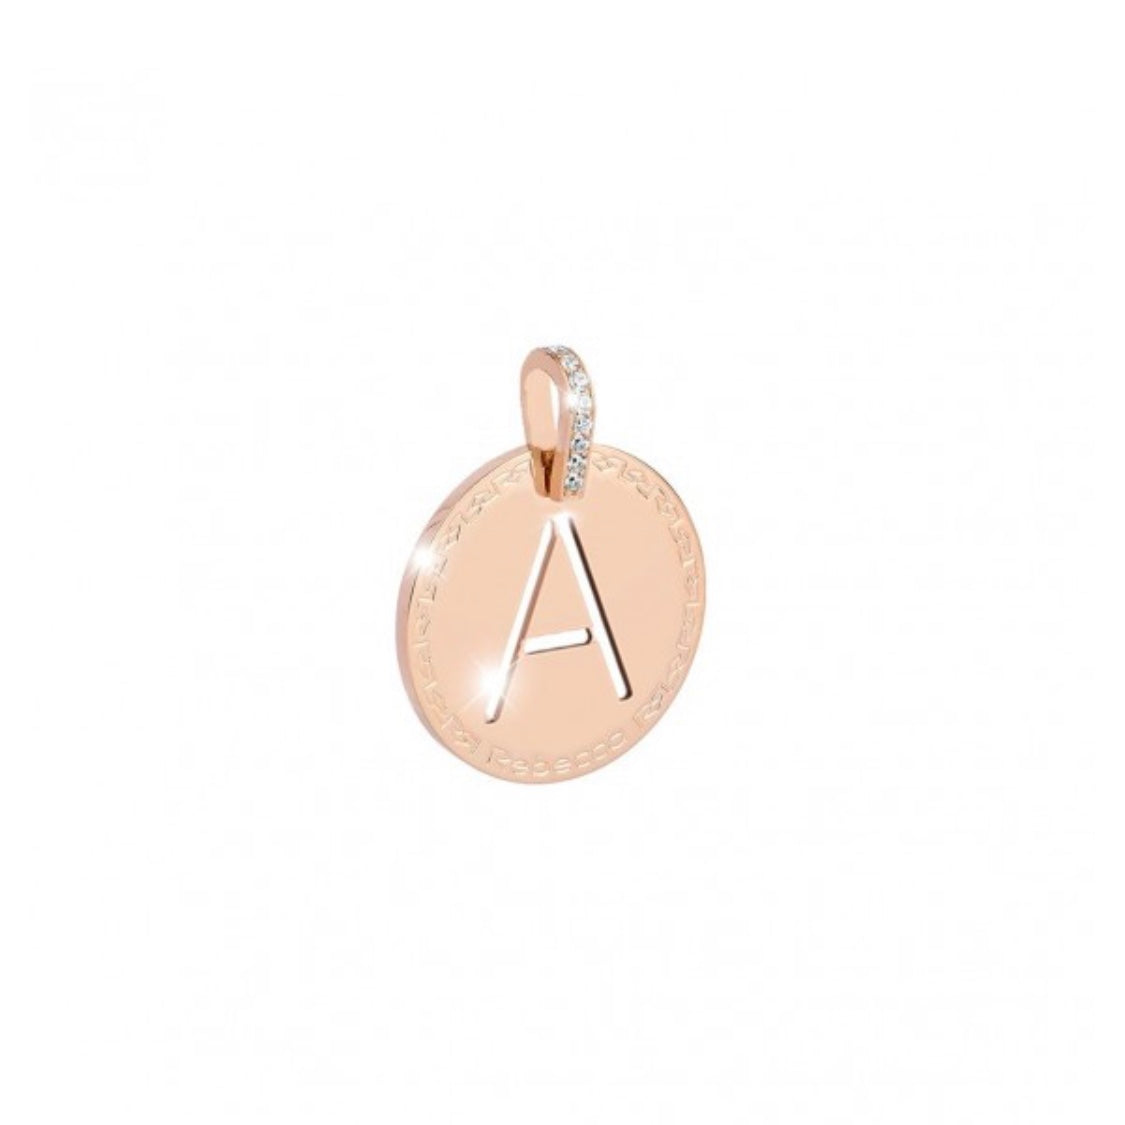 REBECCA MyWorld Letter Necklace - Rose|Large Initial with Crystals - John Ross Jewellers